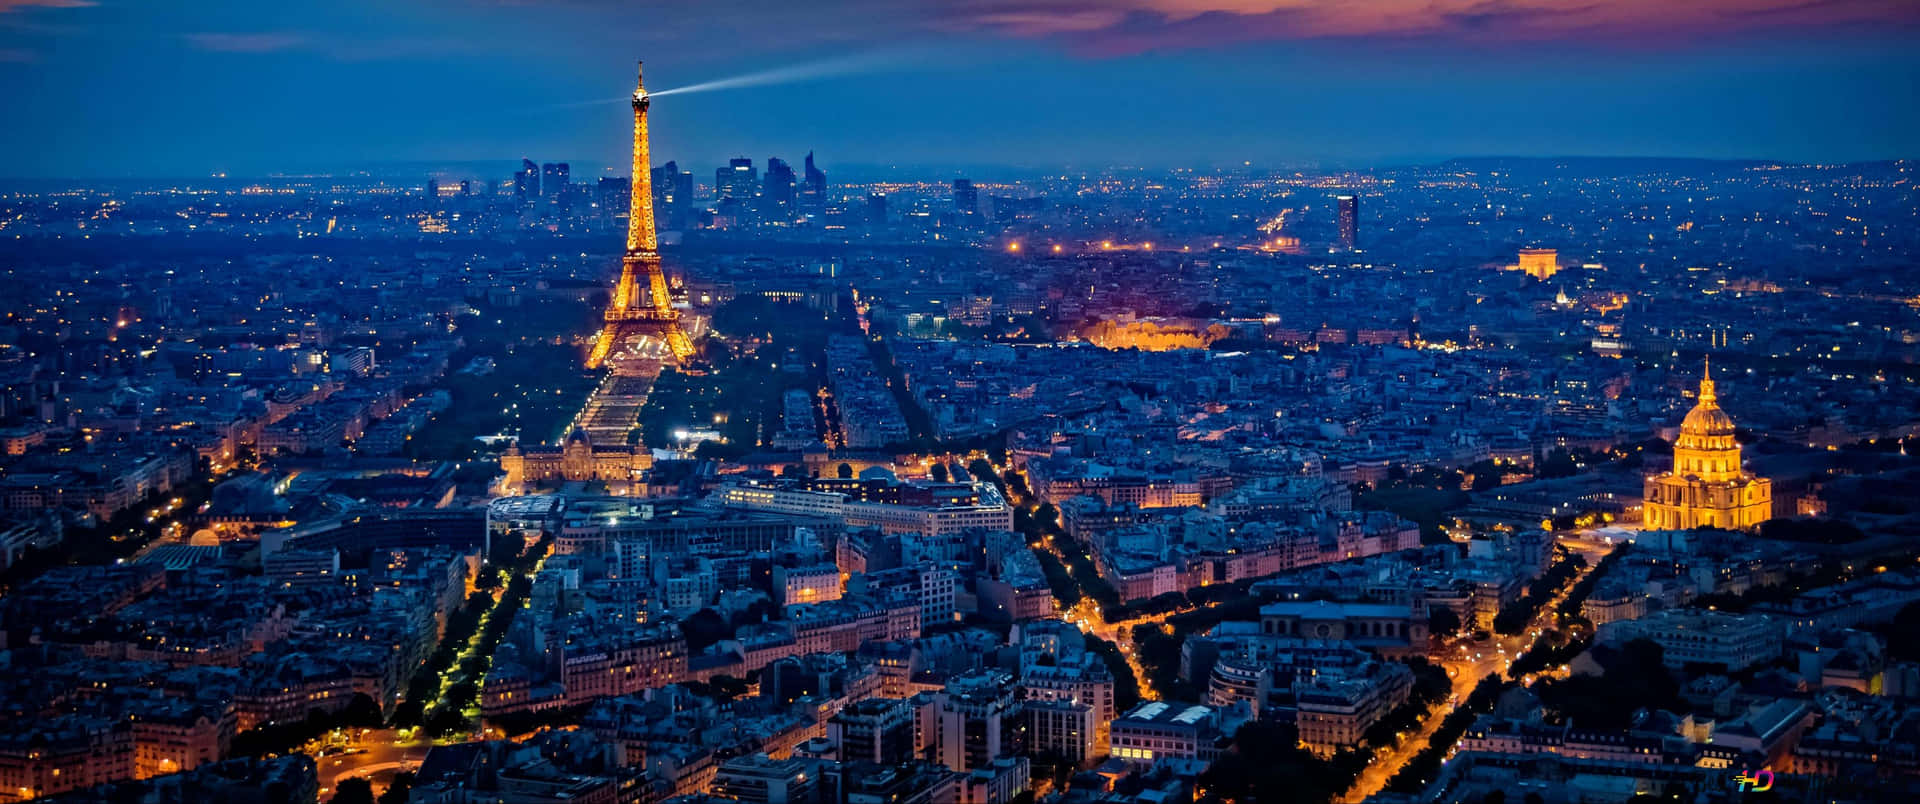 ​Witness the beauty of the Paris skyline at night Wallpaper